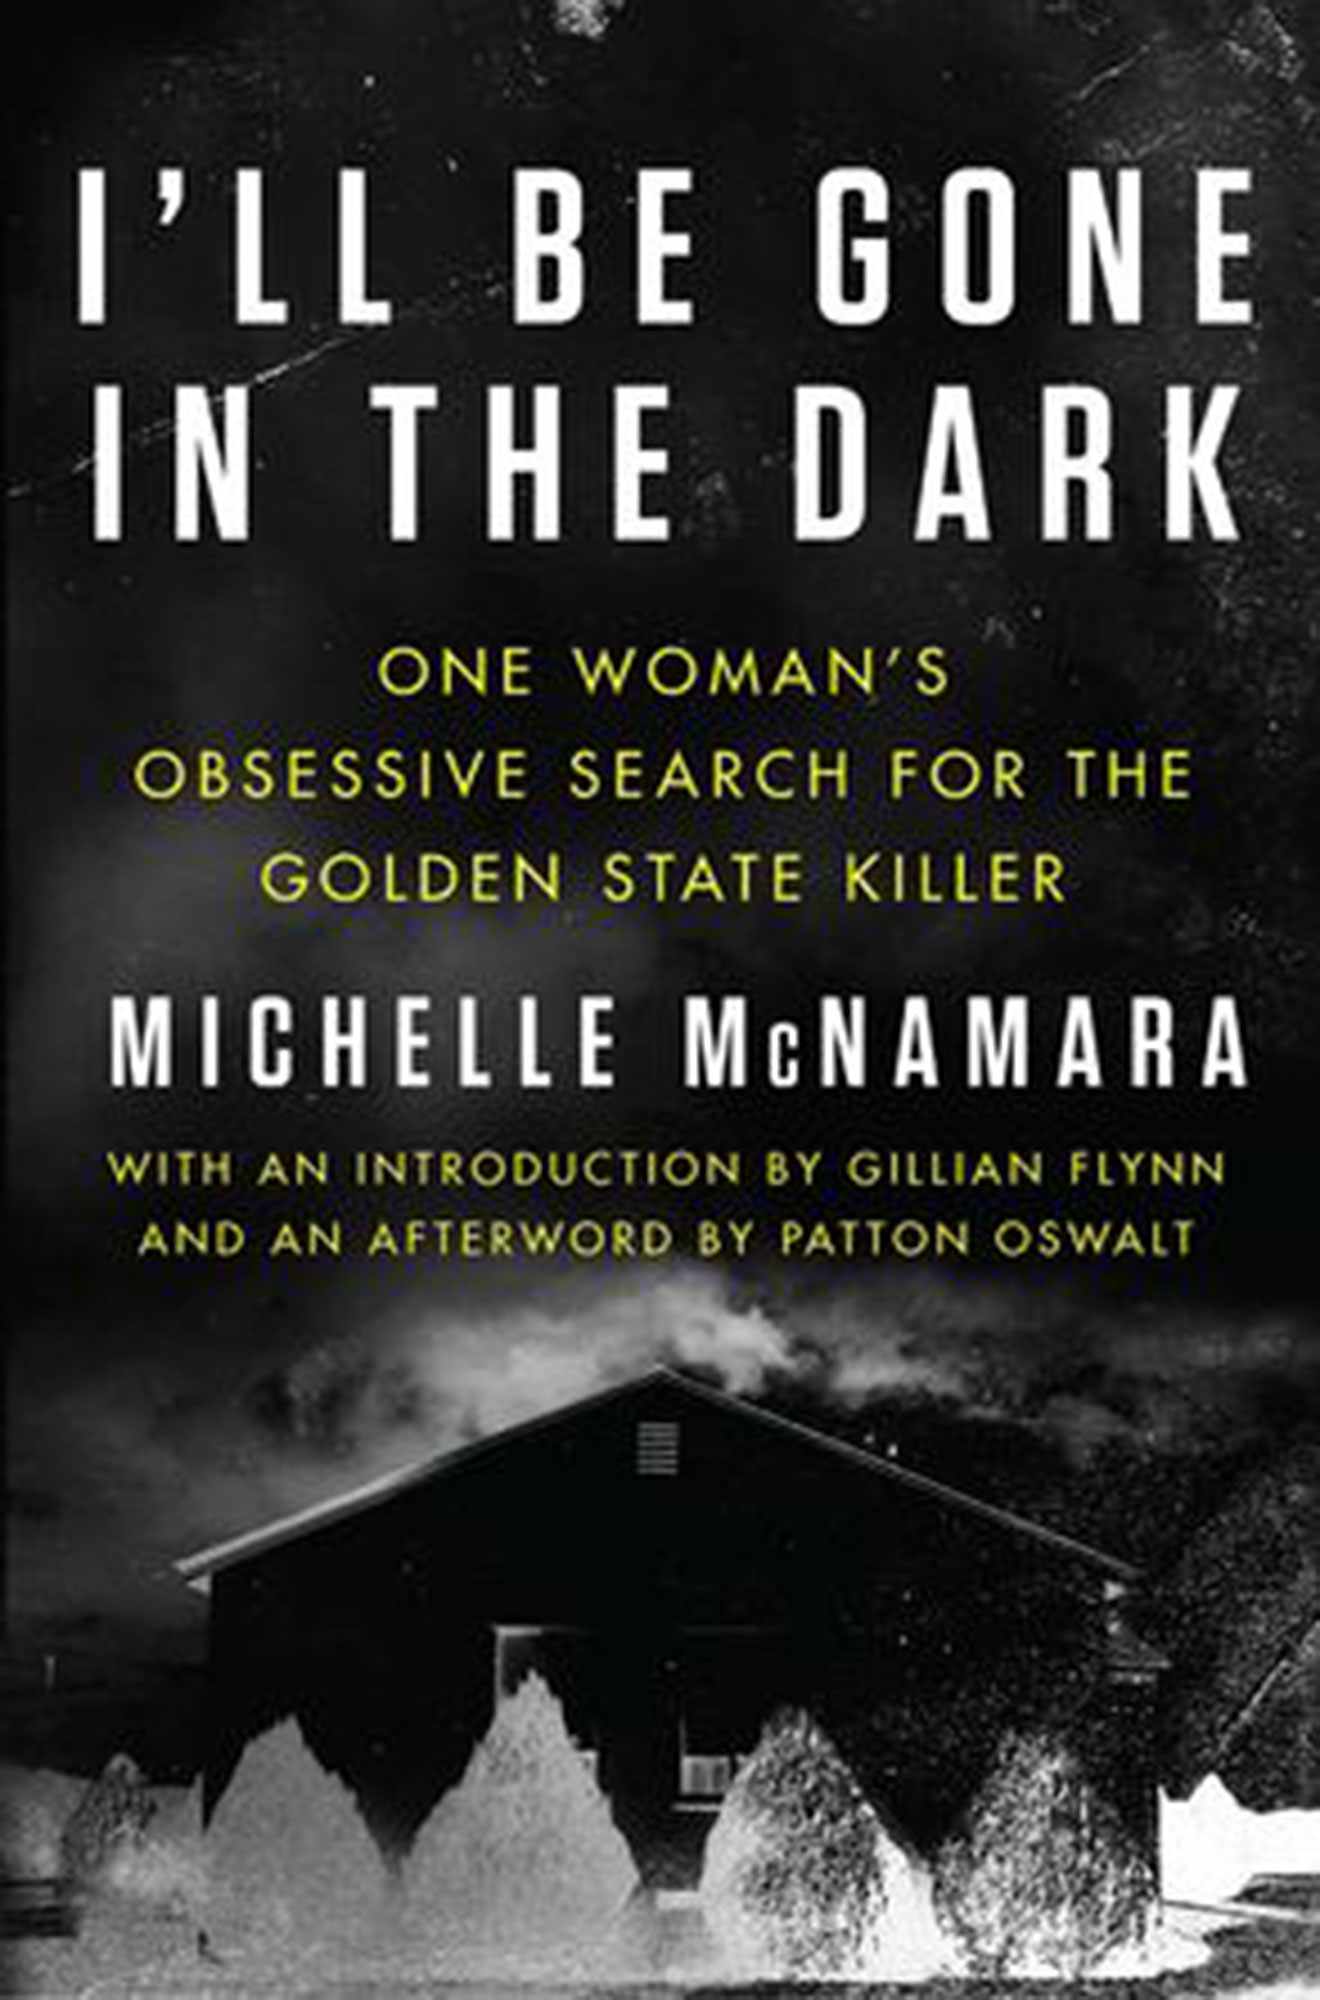 I'll Be Gone in the Dark by Michelle McNamaraCredit: HarperCollins Publishers